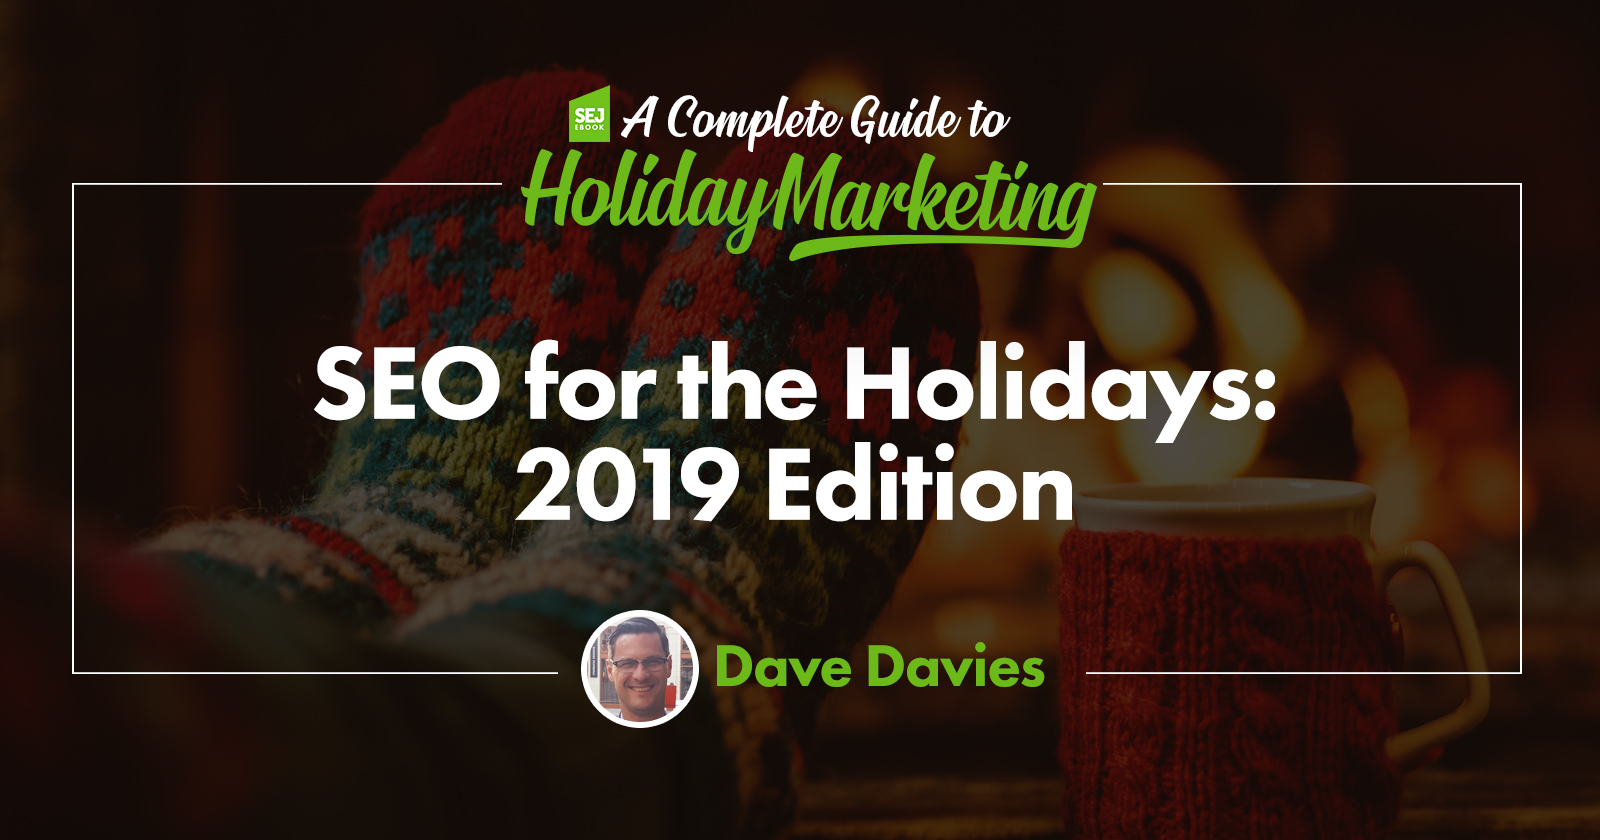 Featured Image - Holiday Marketing Guide - Announcement